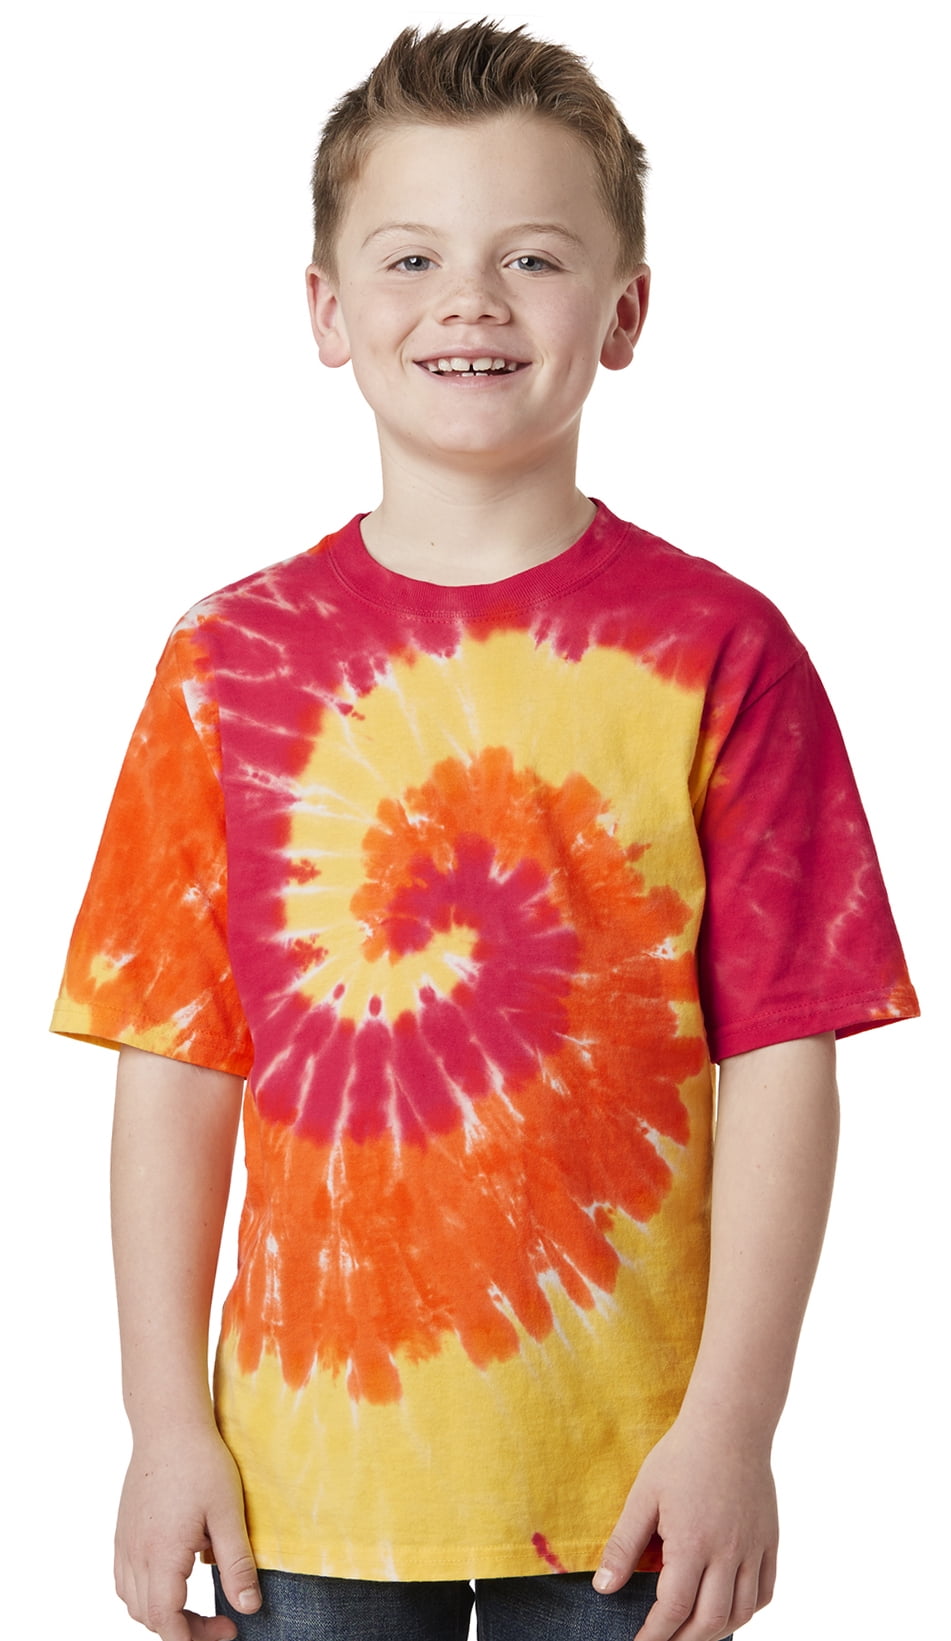 Youth small tie dye shirt